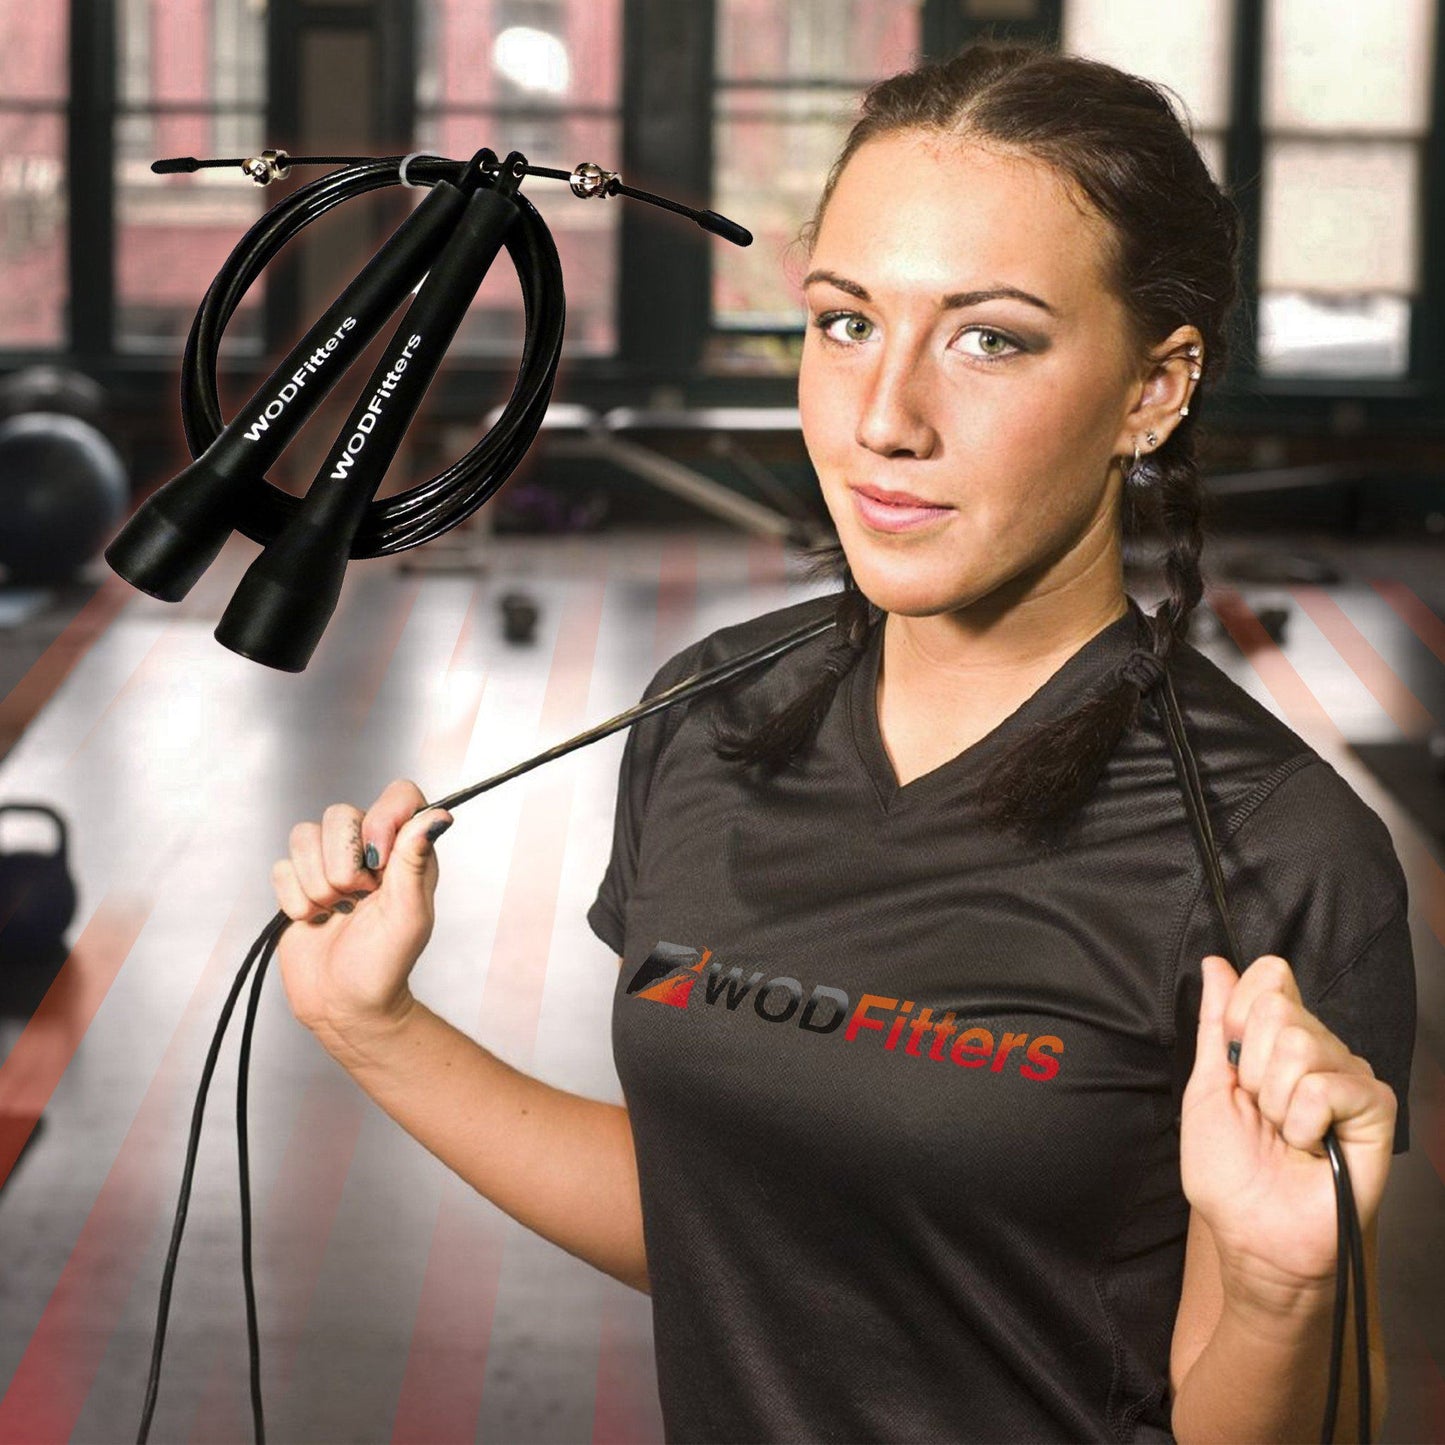 FREE WODFitters Speed Rope * Just Pay $5.95 Shipping & Handling * Limited Time Offer! 